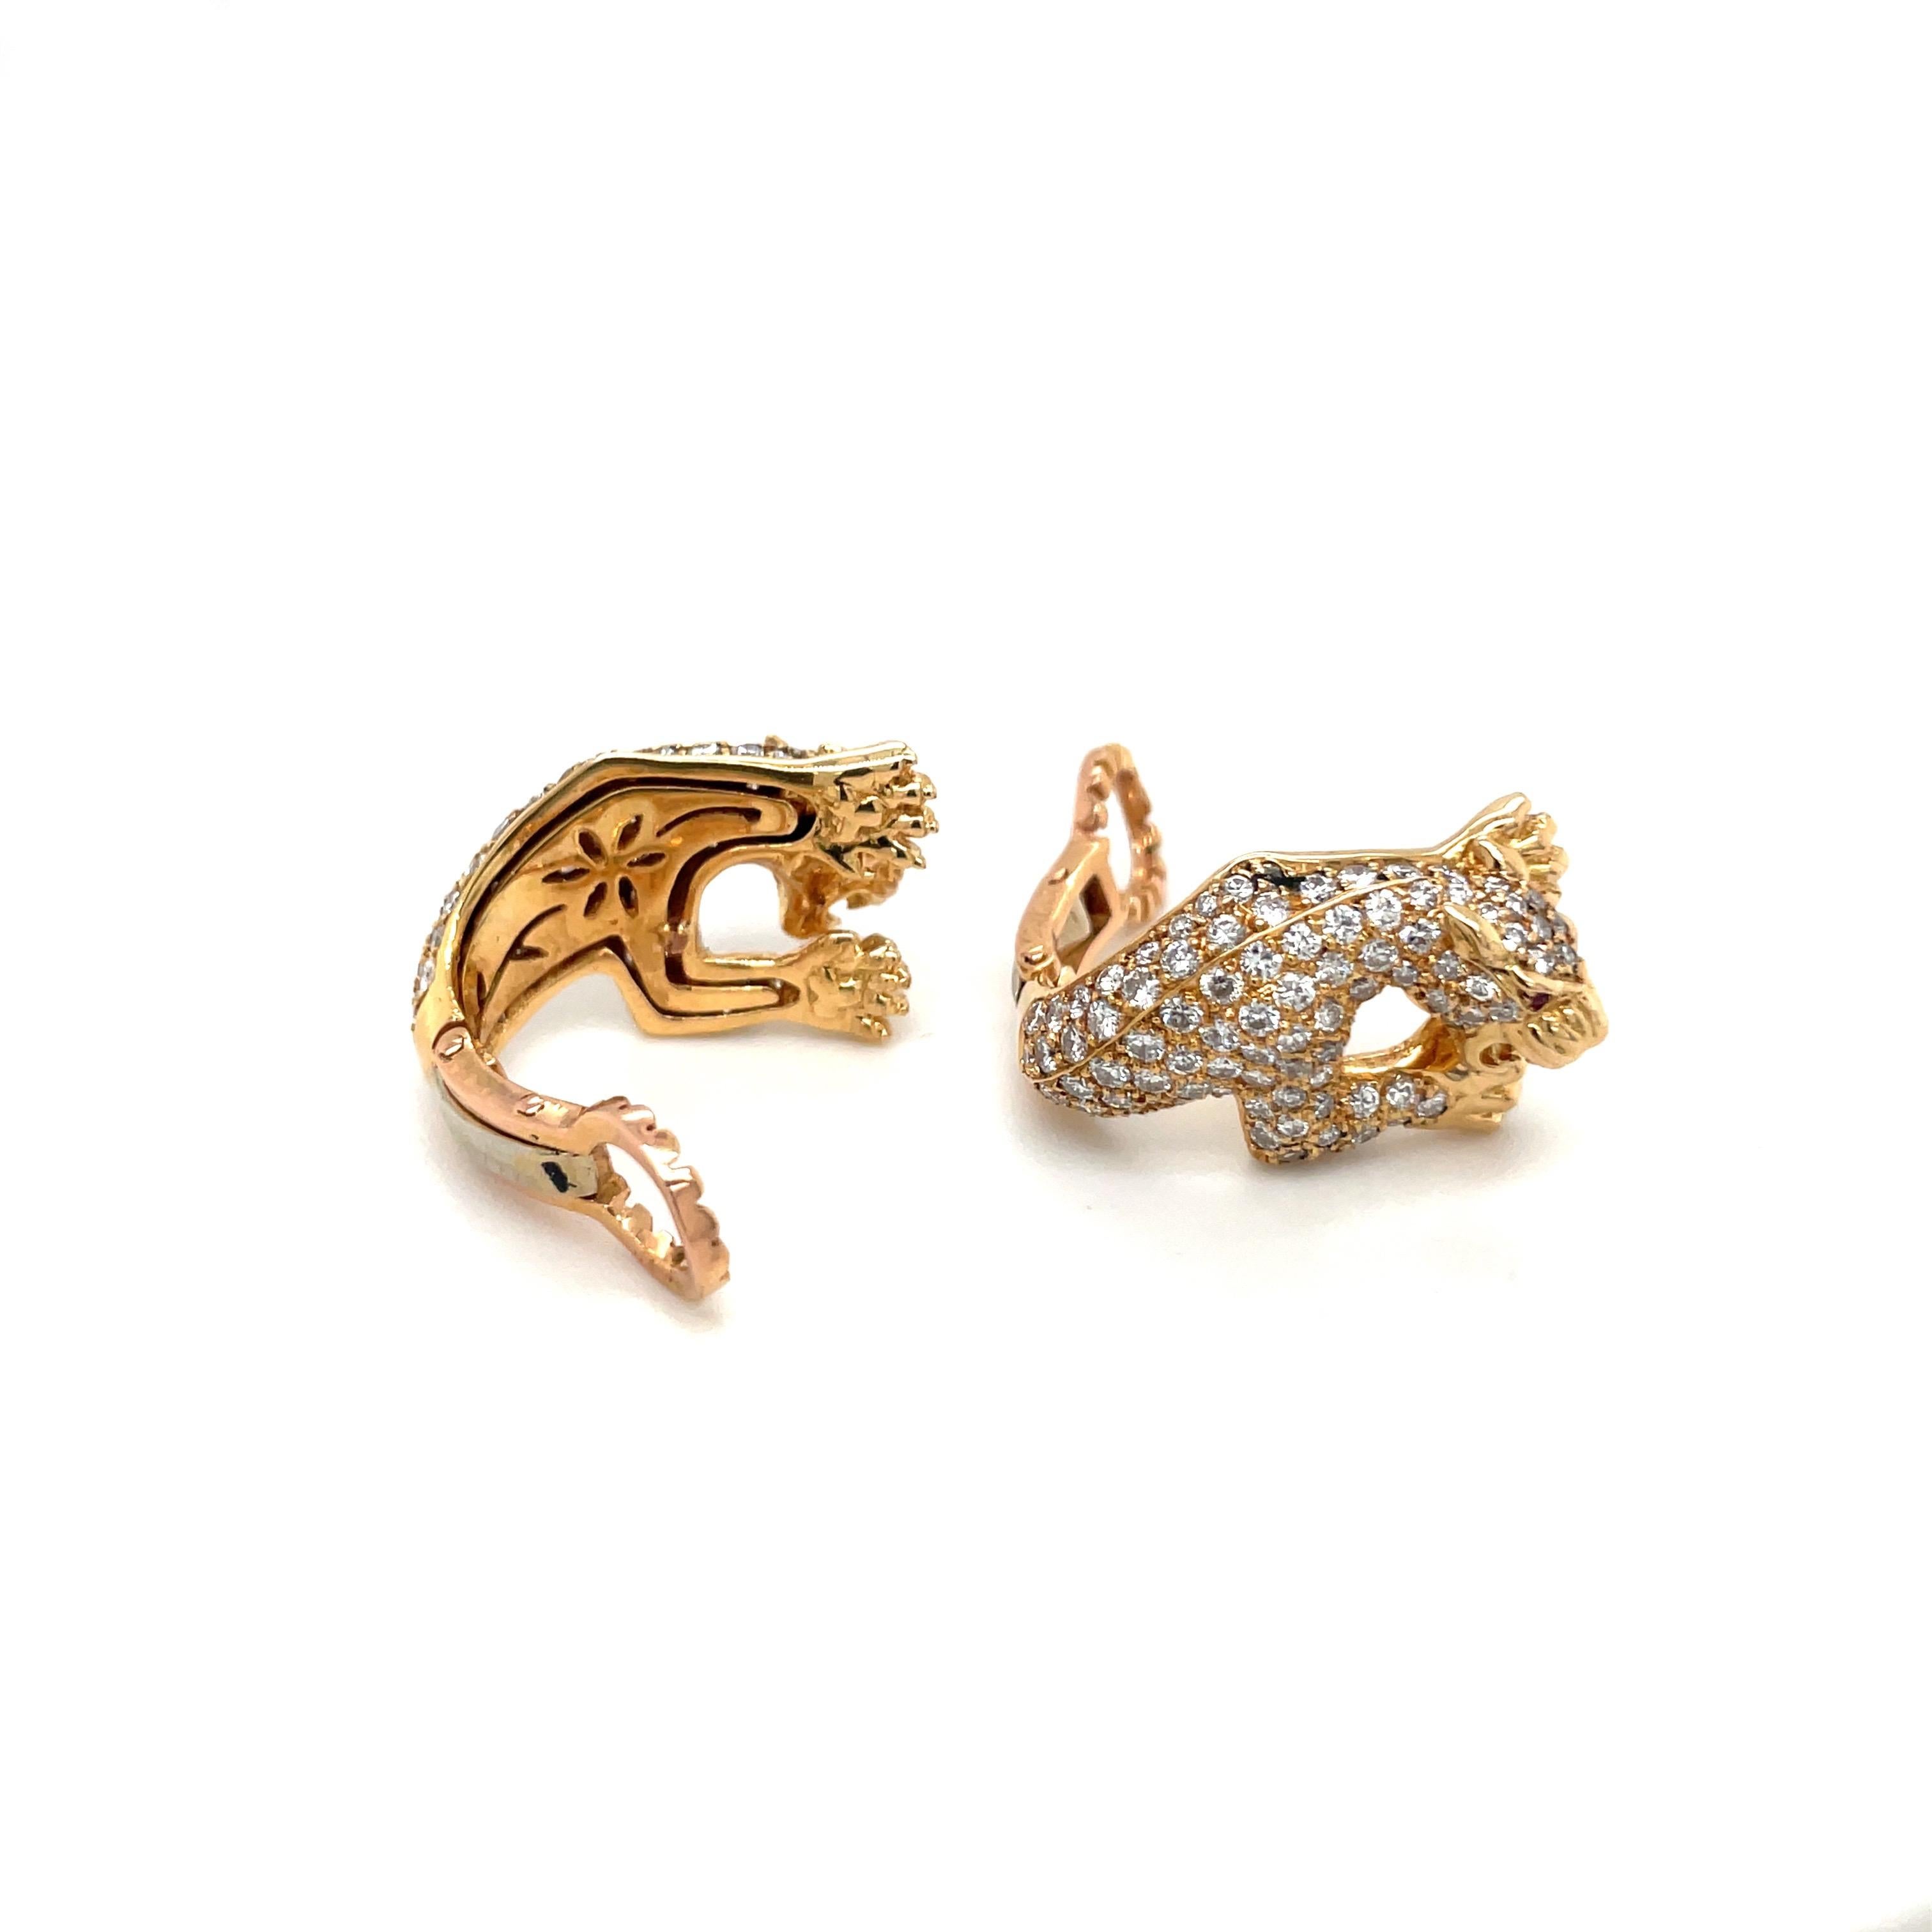 Contemporary Carrera Y Carrera 18 KT Yellow Gold 2.75 Ct. Full Pave Diamond Panther Earrings For Sale